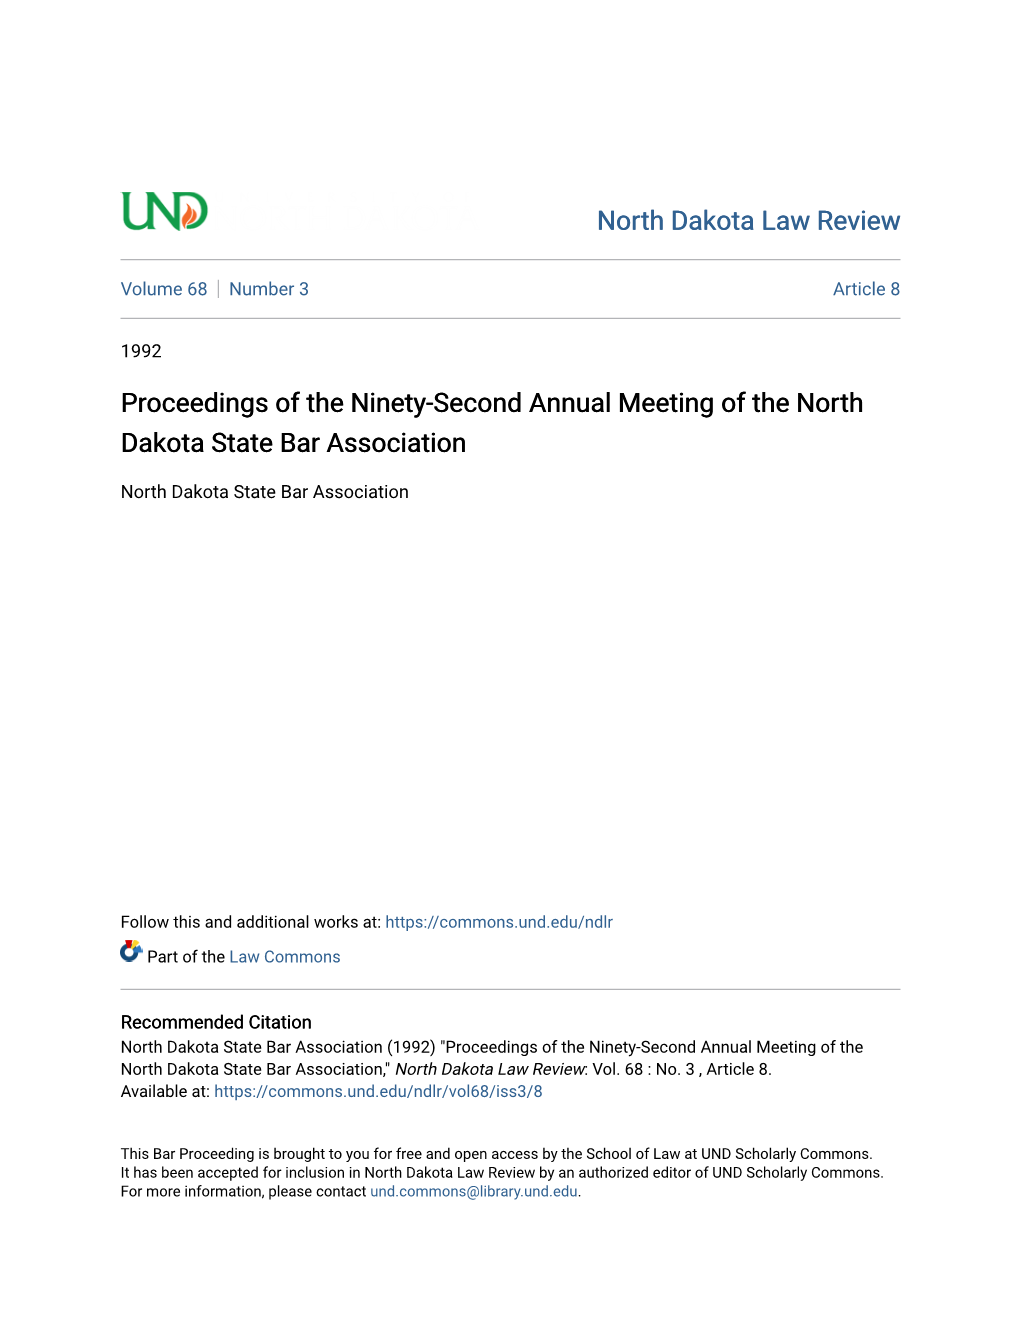 Proceedings of the Ninety-Second Annual Meeting of the North Dakota State Bar Association